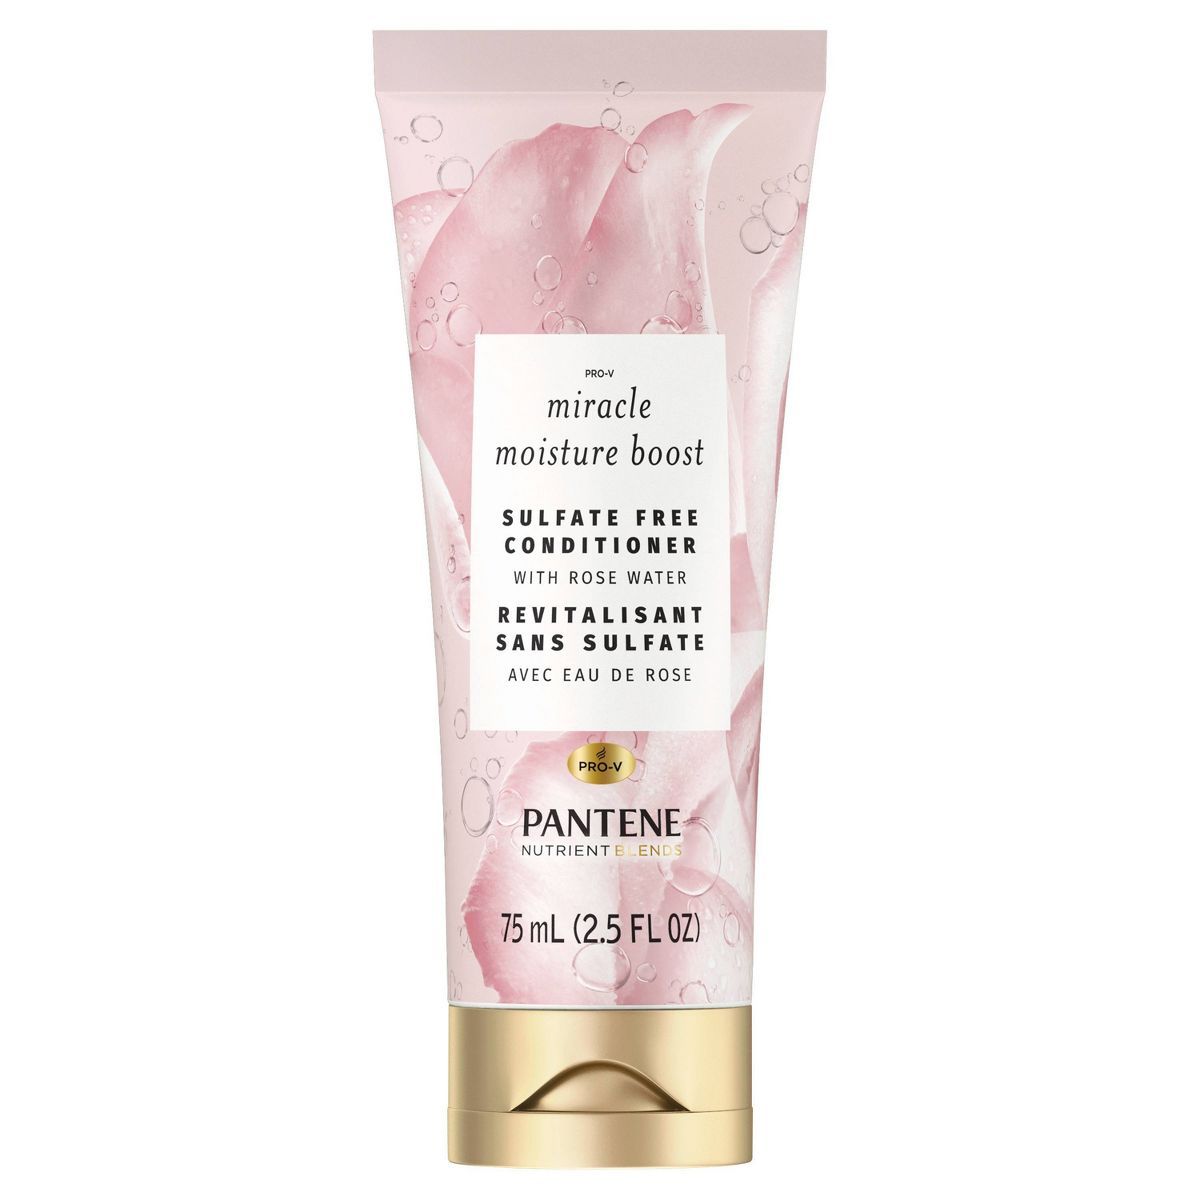 Pantene Nutrient Blends Sulfate-Free Miracle Moisture Rose Water Conditioner | Target